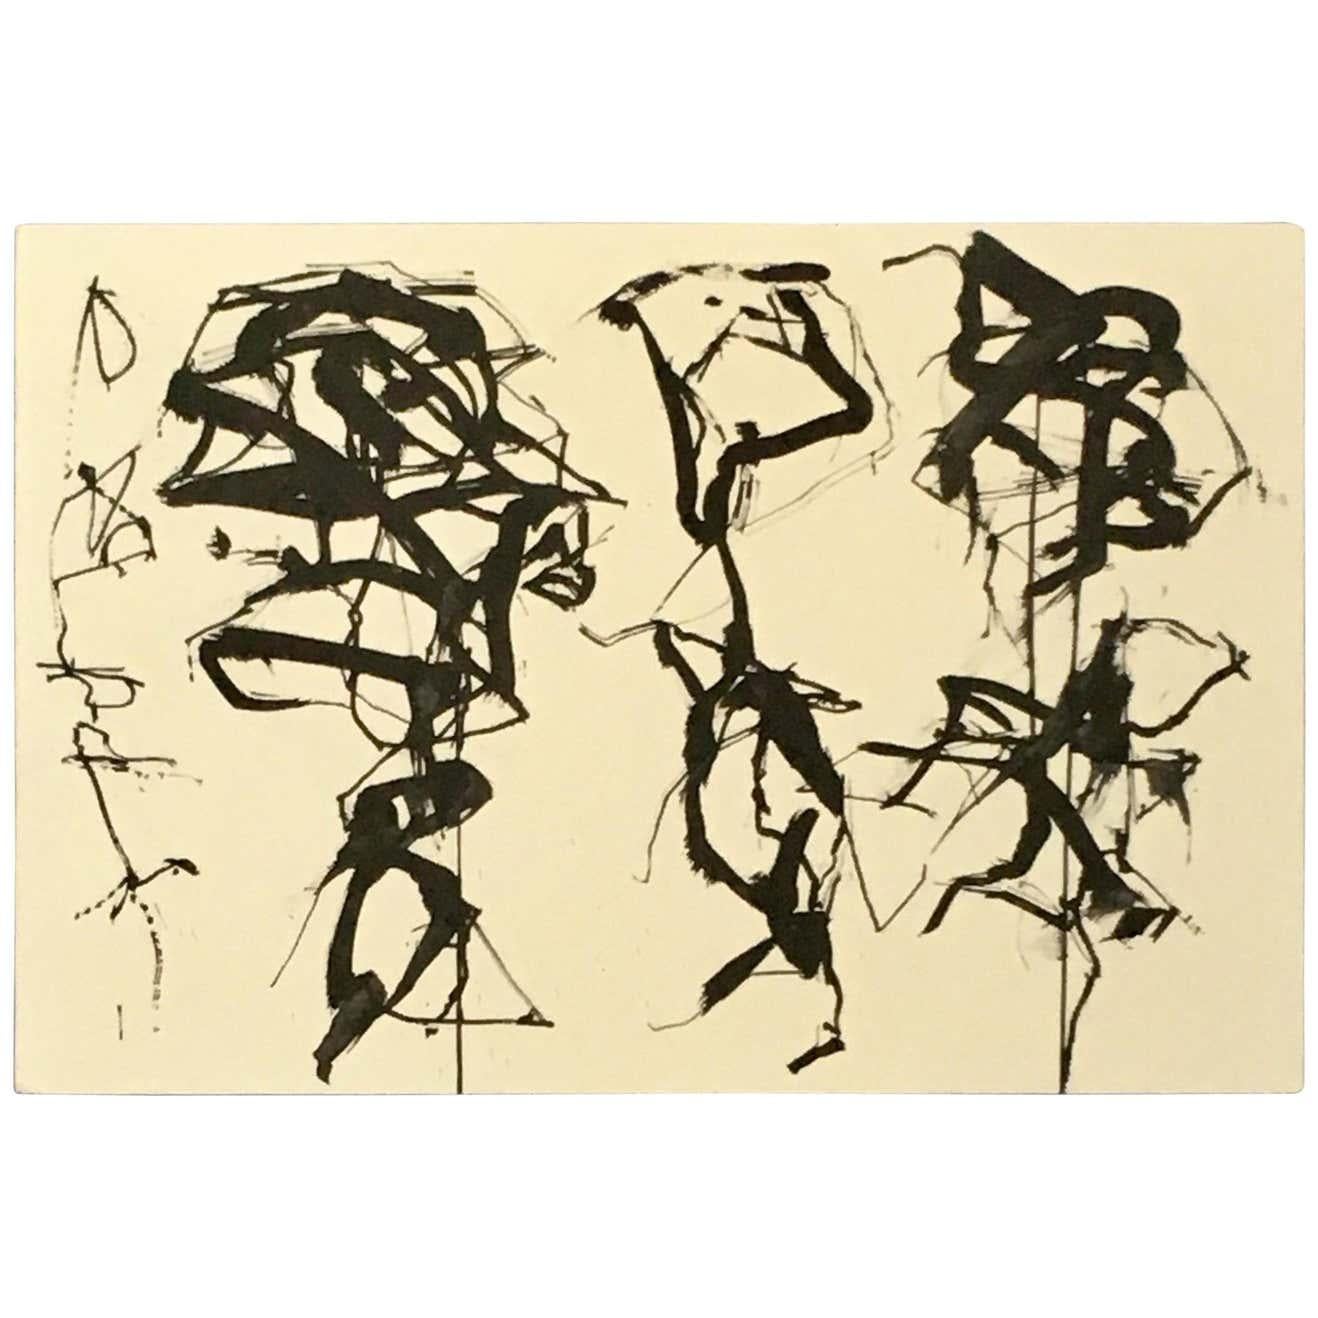 Brice Marden 
Vintage Exhibition Announcement
Published in conjunction with 'Brice Marden Work Books 1964-1995, Kunstmuseum Winterthur, 1997

Measures: 5 x 7 inches (opens to 5 x 14 inches).
Very good condition; printed on fine paper with